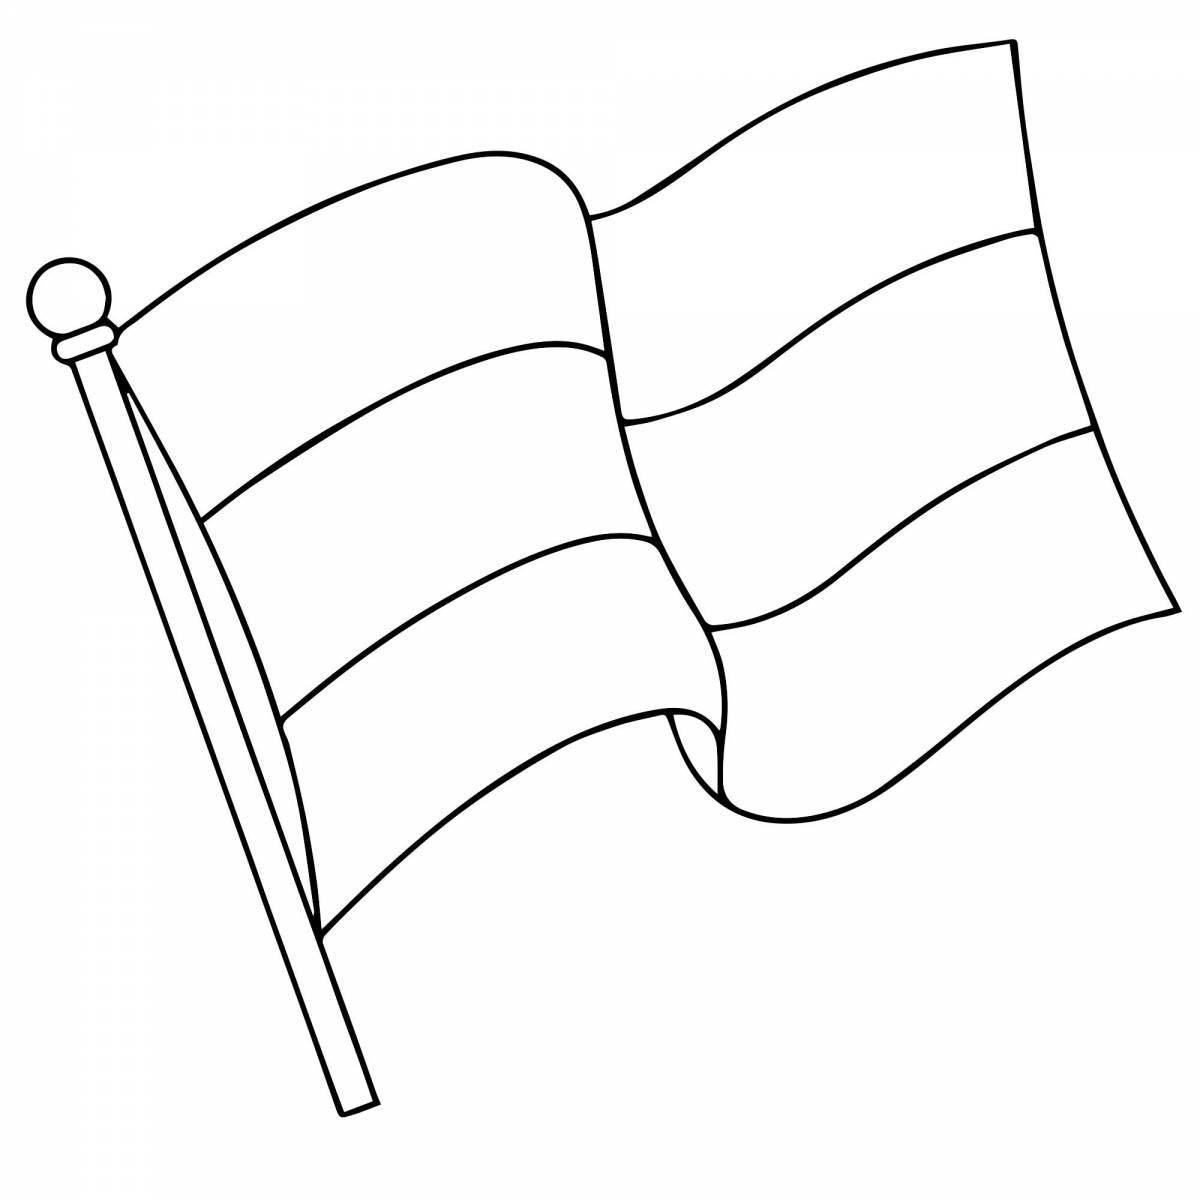 Amazing flag coloring page for kids